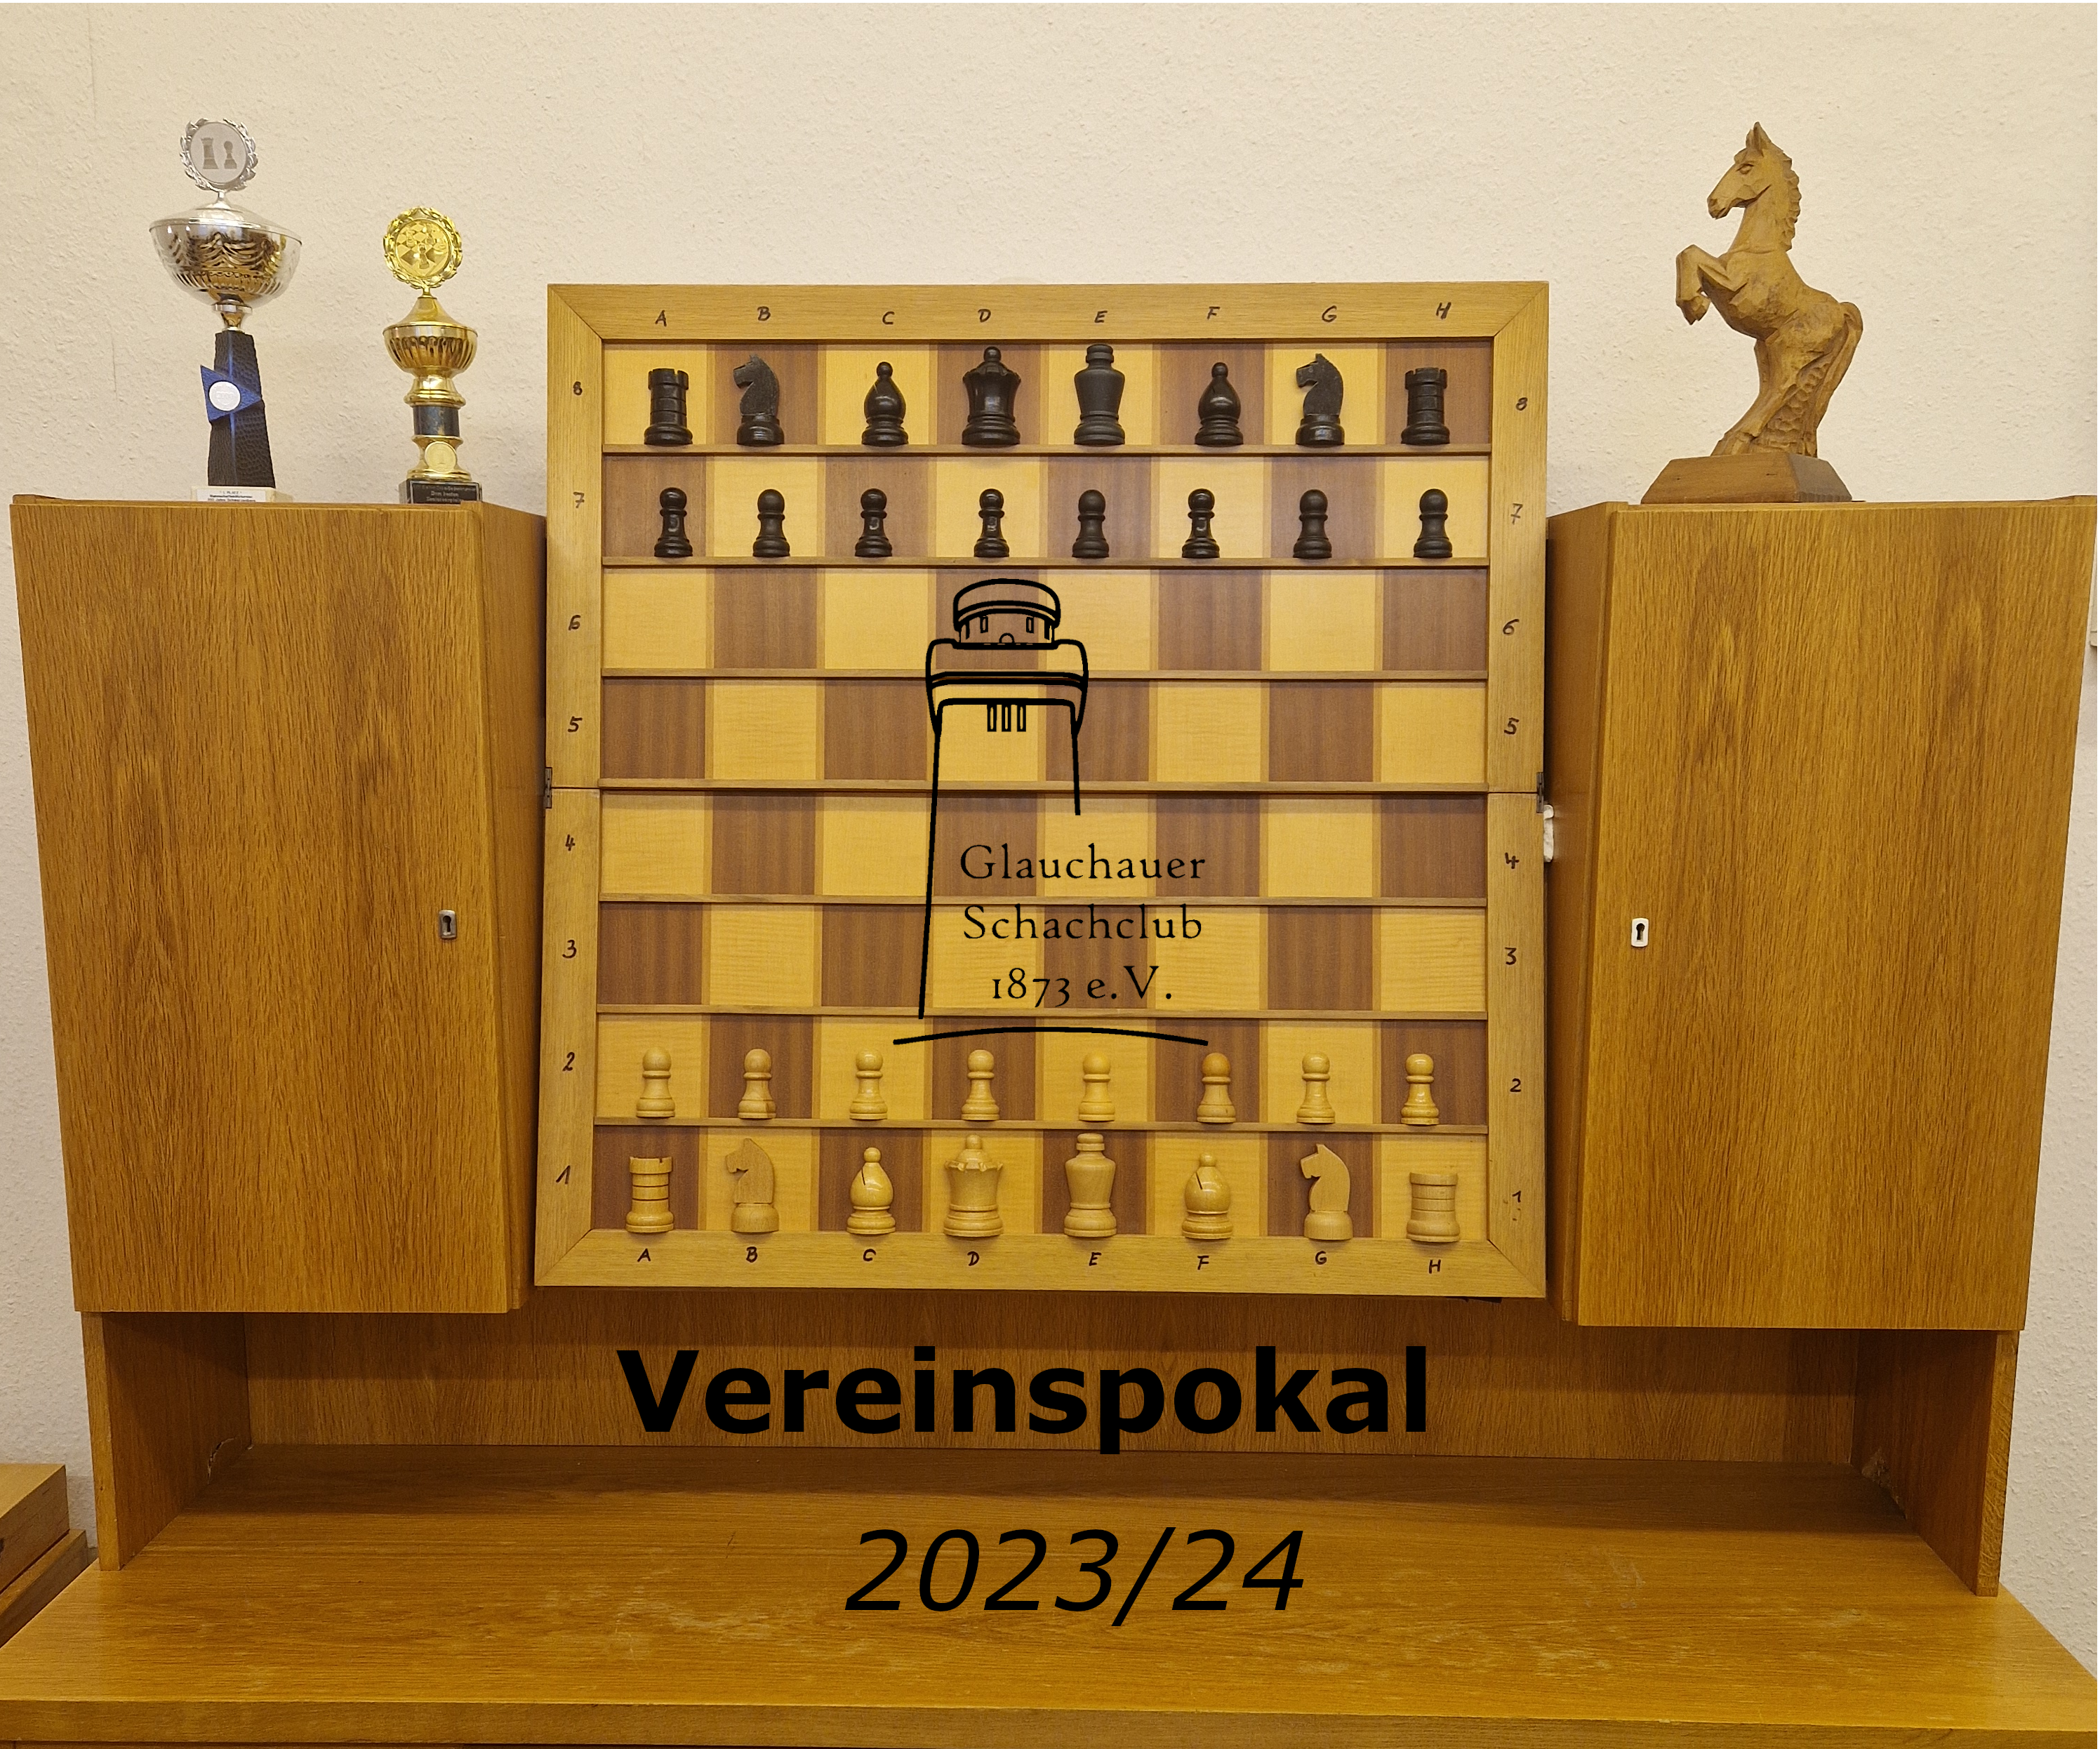 You are currently viewing Vereinspokal 2023/2024